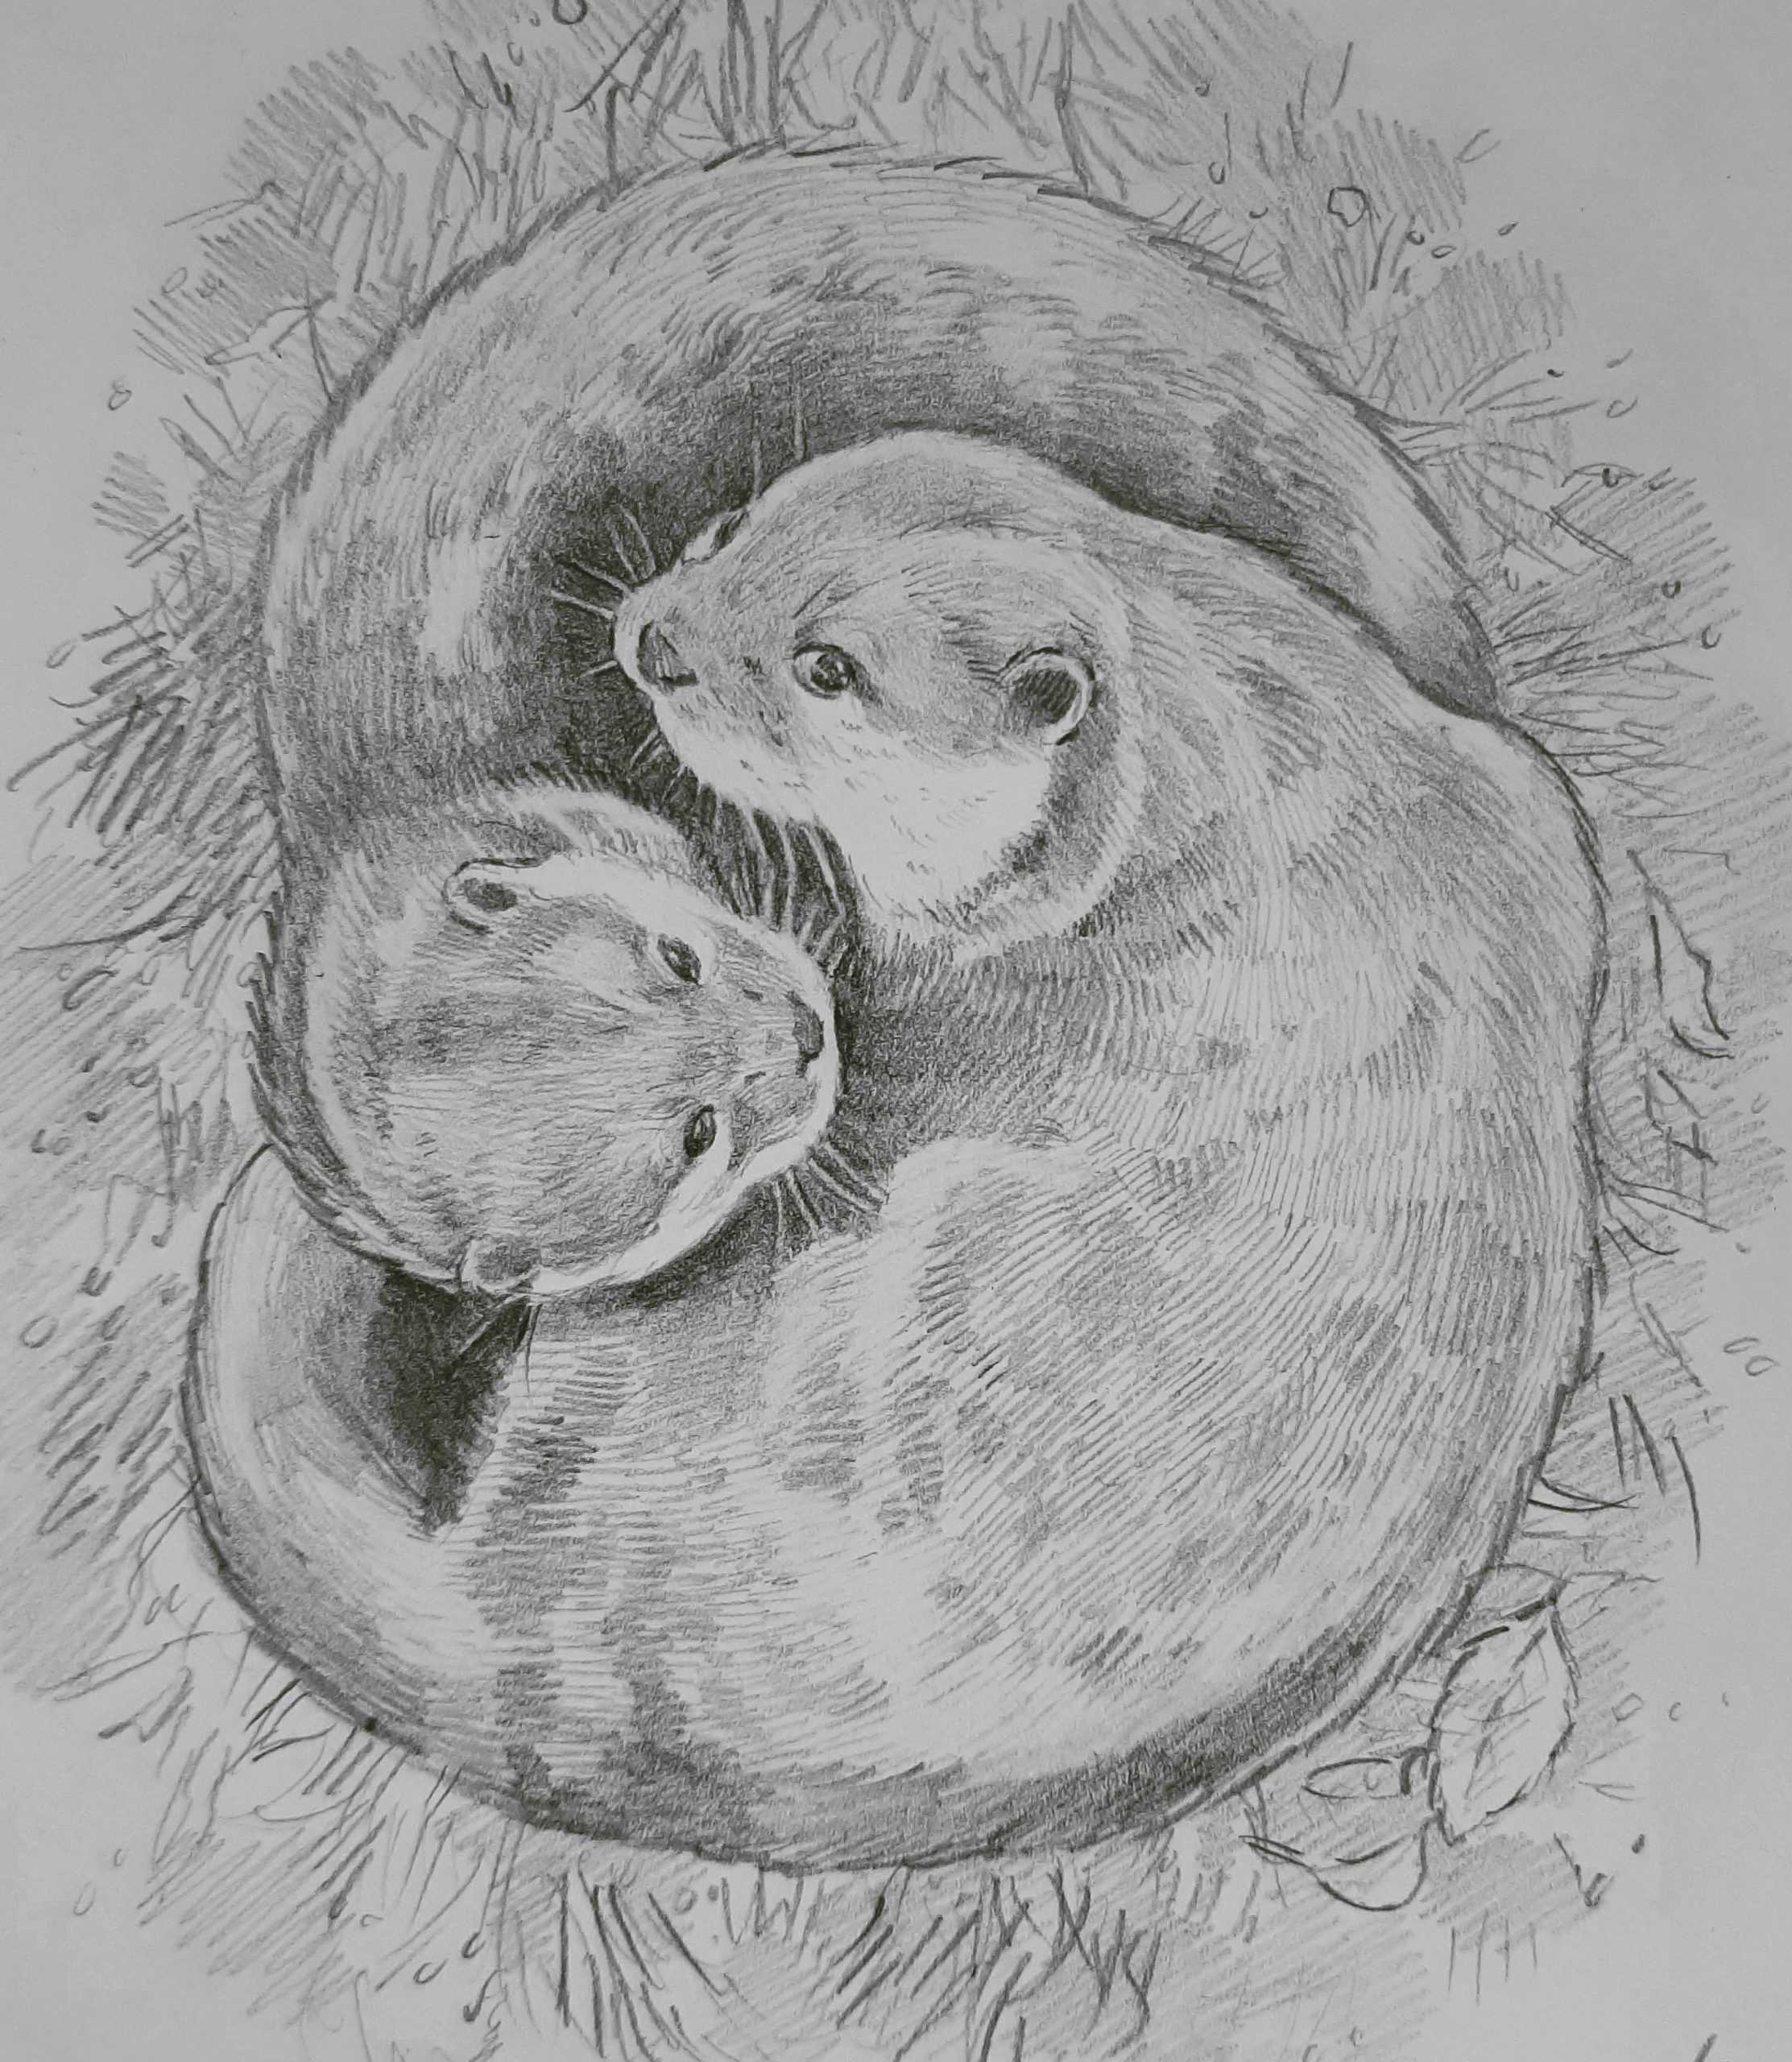 Drawing of two otters